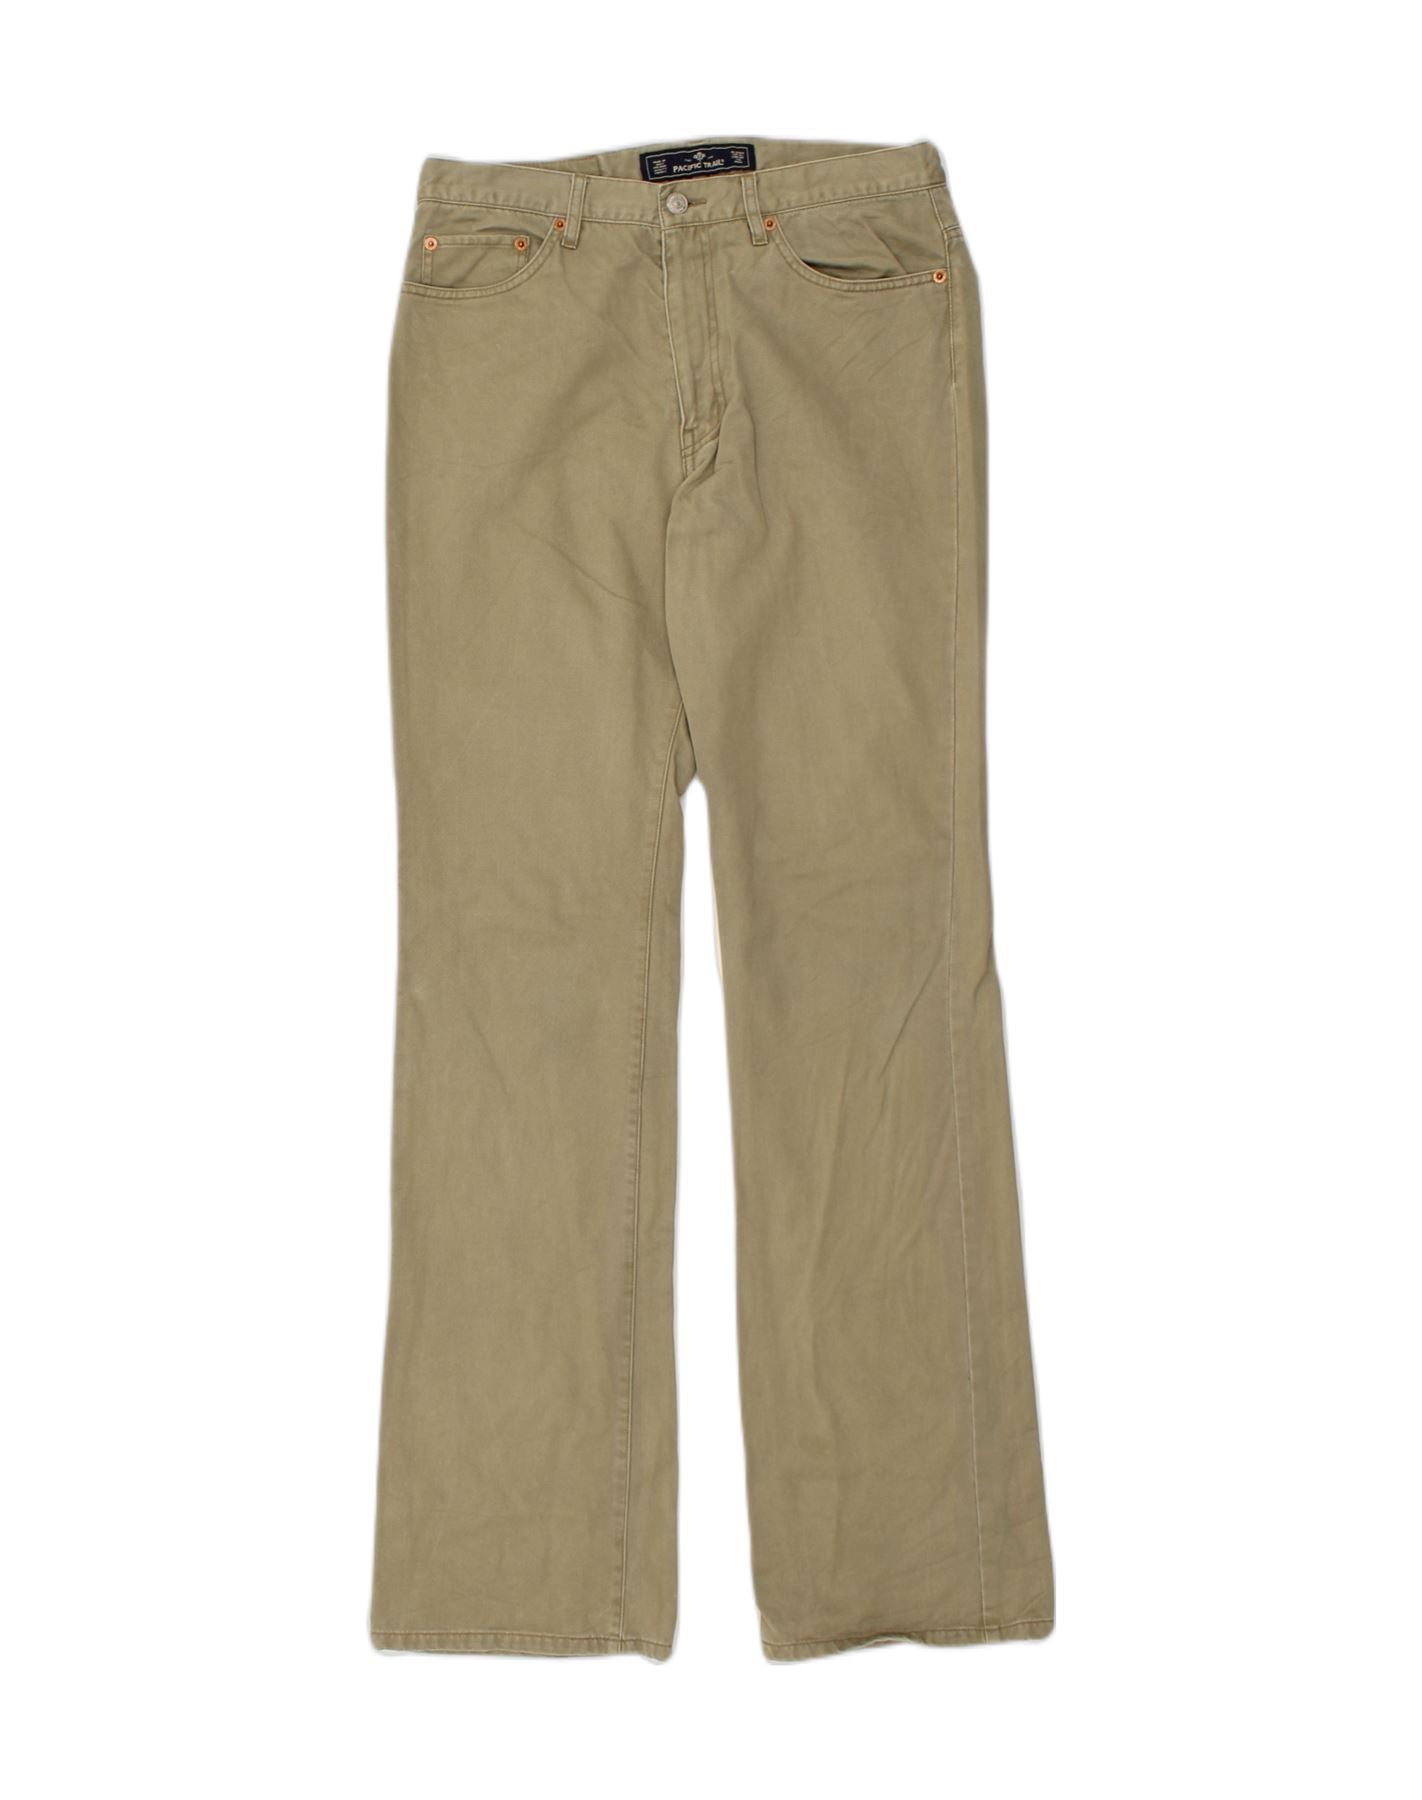 Buy a Ryan Seacrest Mens Suiting Casual Trouser Pants | Tagsweekly